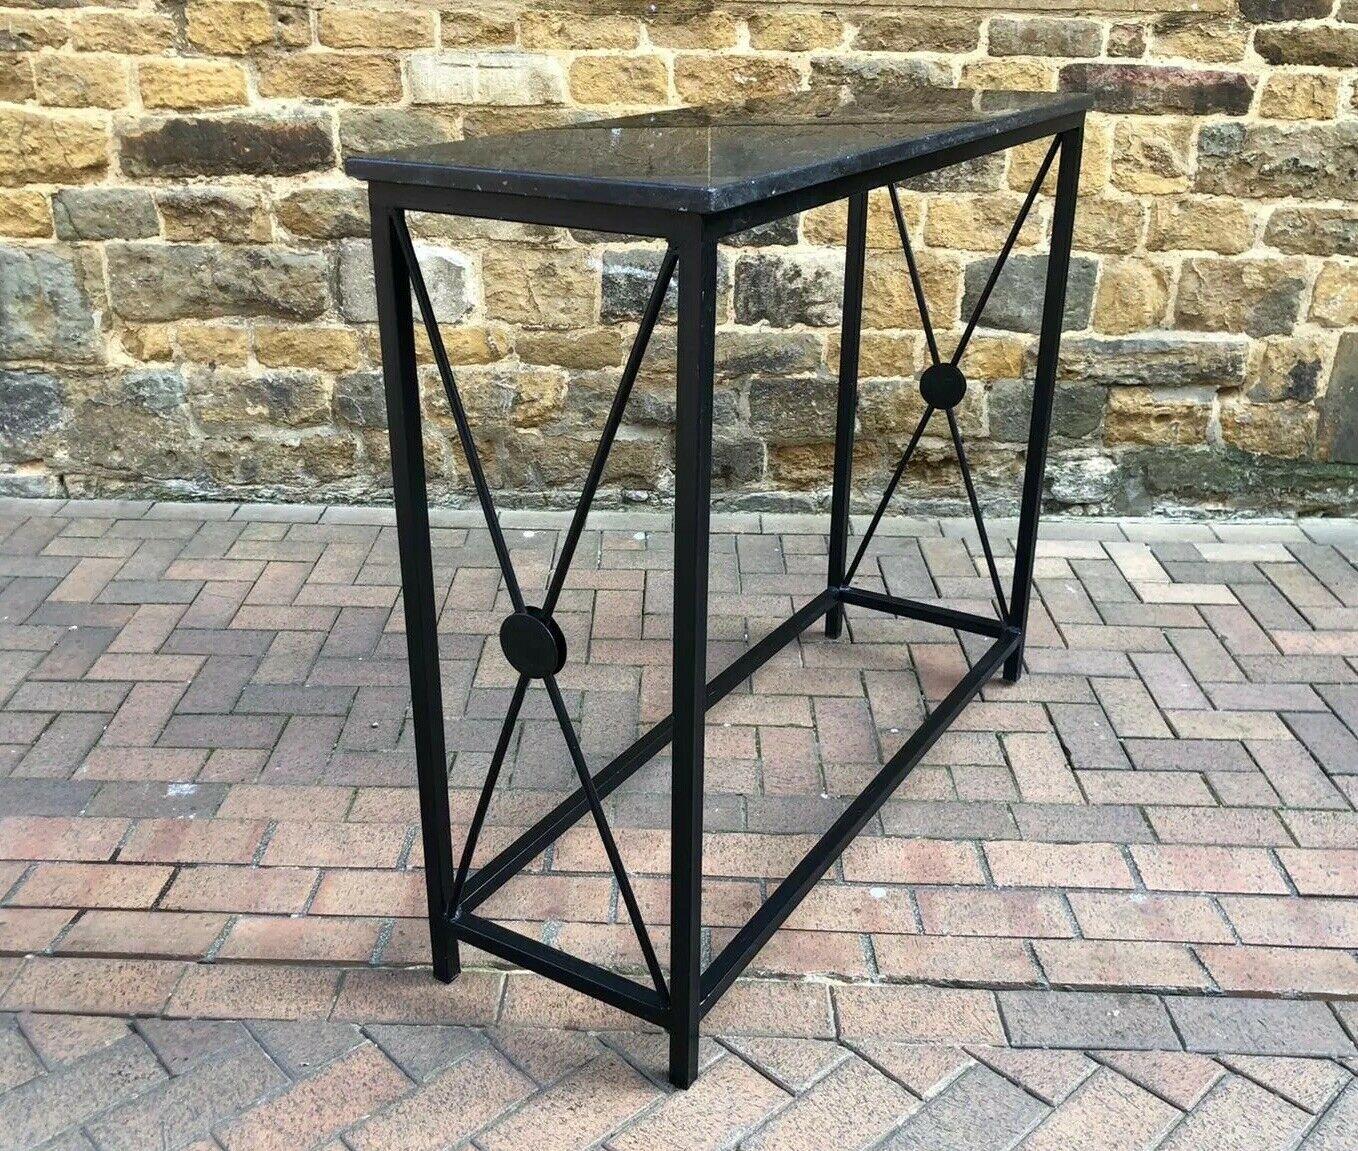 This is a beautiful marble-topped console table with a black wrought iron frame.
Very stylish and functional table that would look great in any home.

  